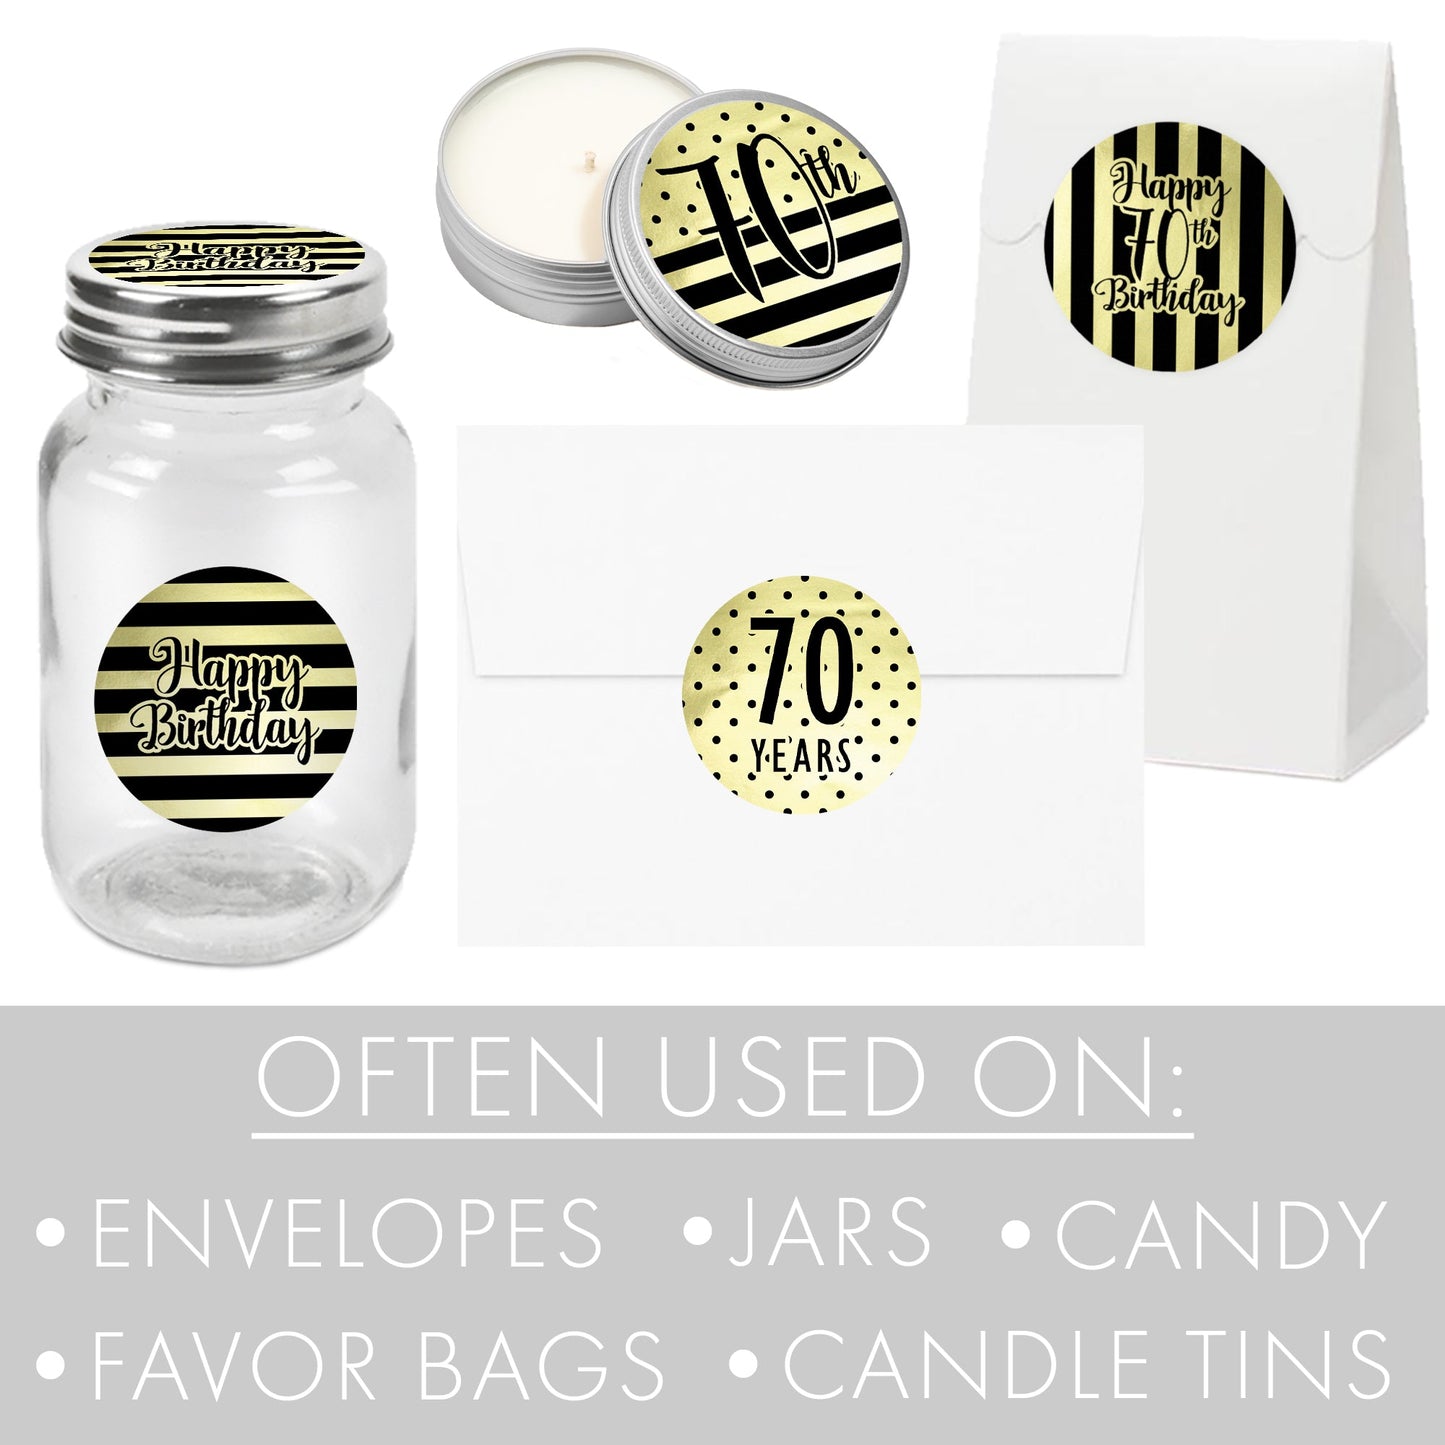  Add flair to your 70th birthday party with these black and gold circle labels!